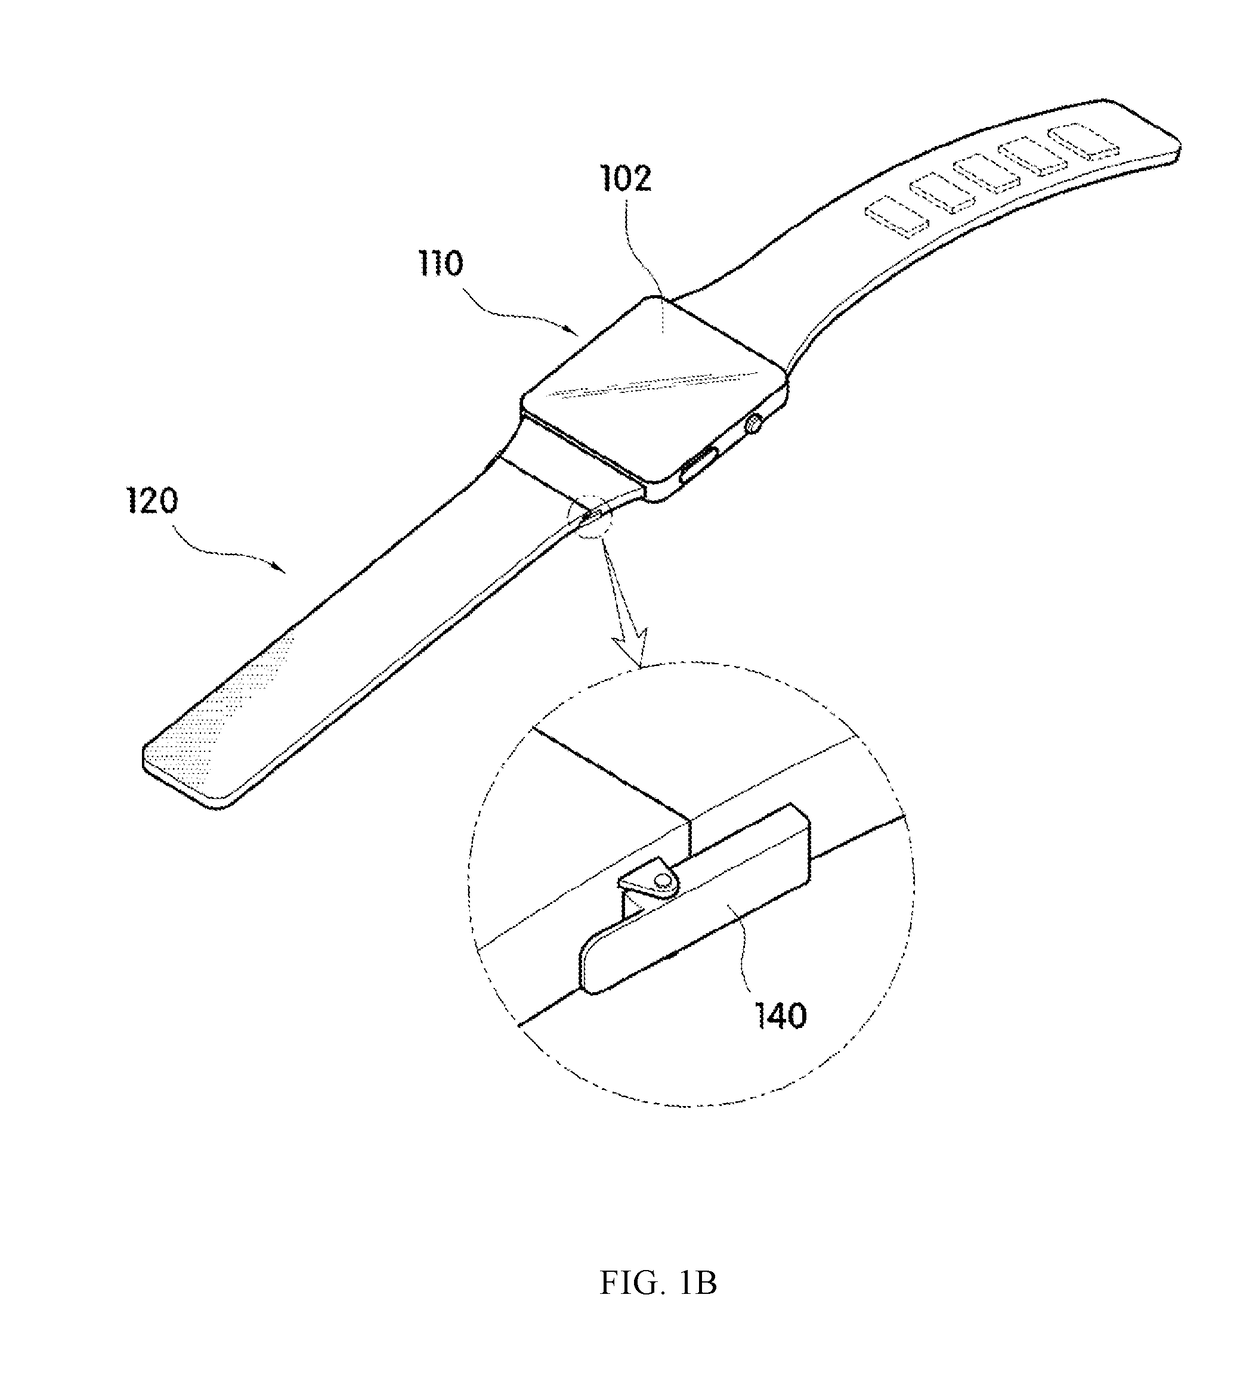 Wearable smart device having flexible semiconductor package mounted on a band